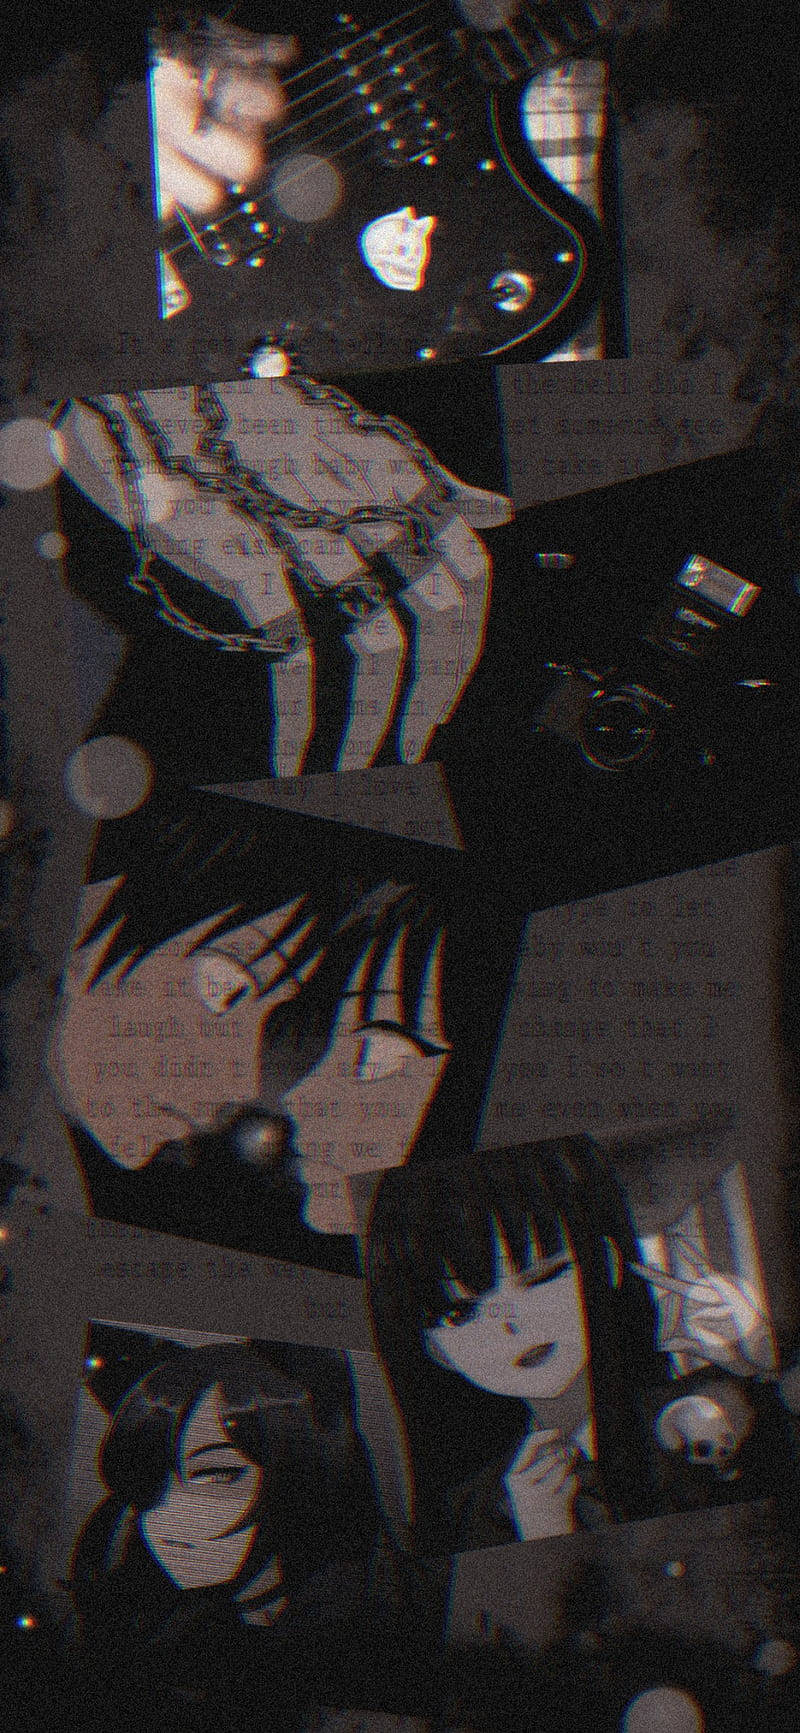 Emoaesthetic Anime → Emo Estetisk Anime (note: This Is A Direct Translation. It May Be More Common In Swedish To Use The English Words For This Type Of Wallpaper As It Is A Specific Genre/style.) Wallpaper